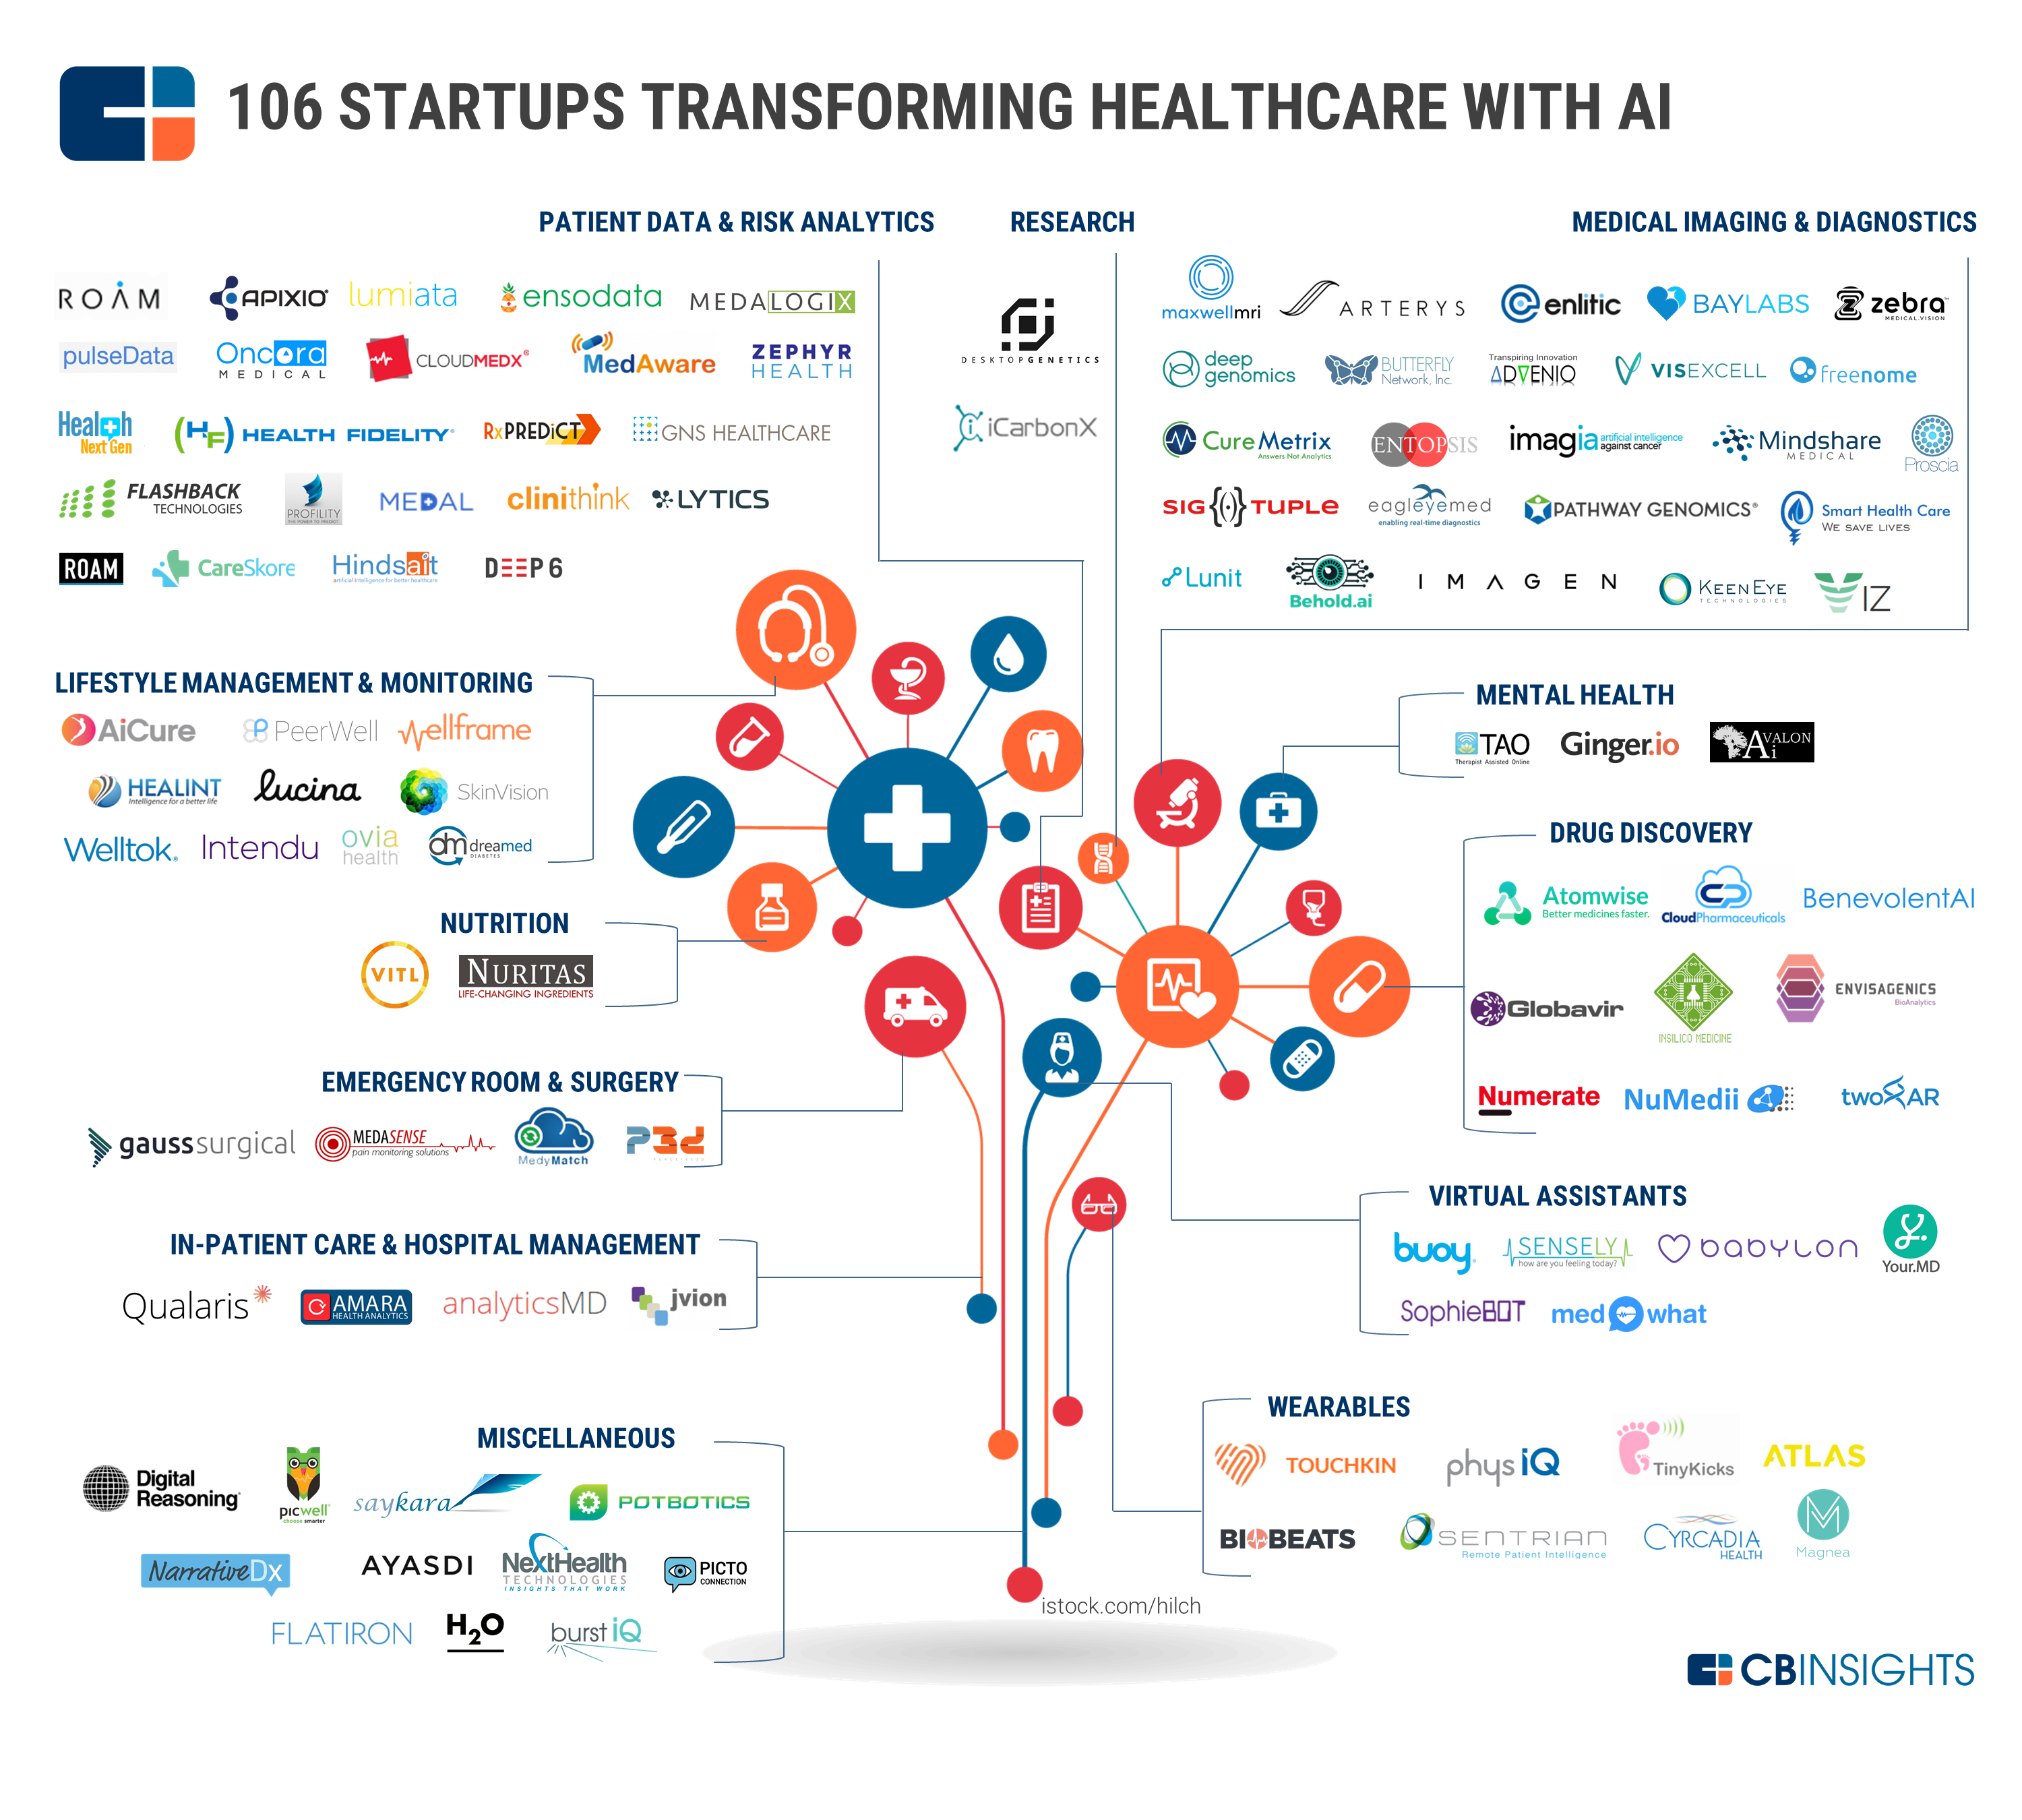 106 startups transforming healthcare with AI